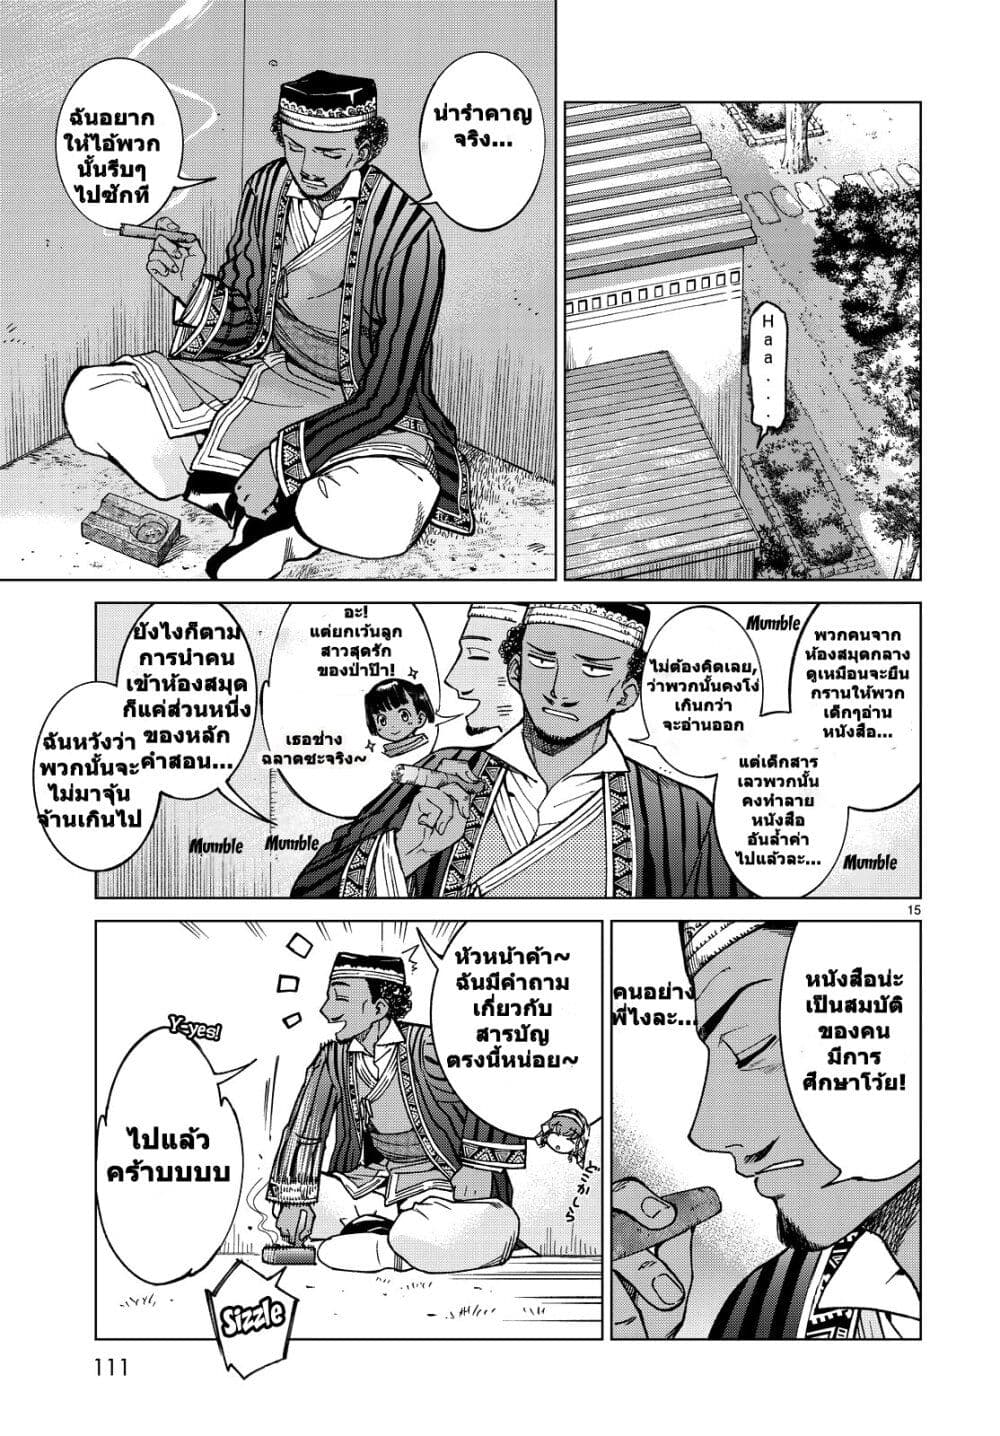 Magus of the Library ตอนที่ 2.2 (4)